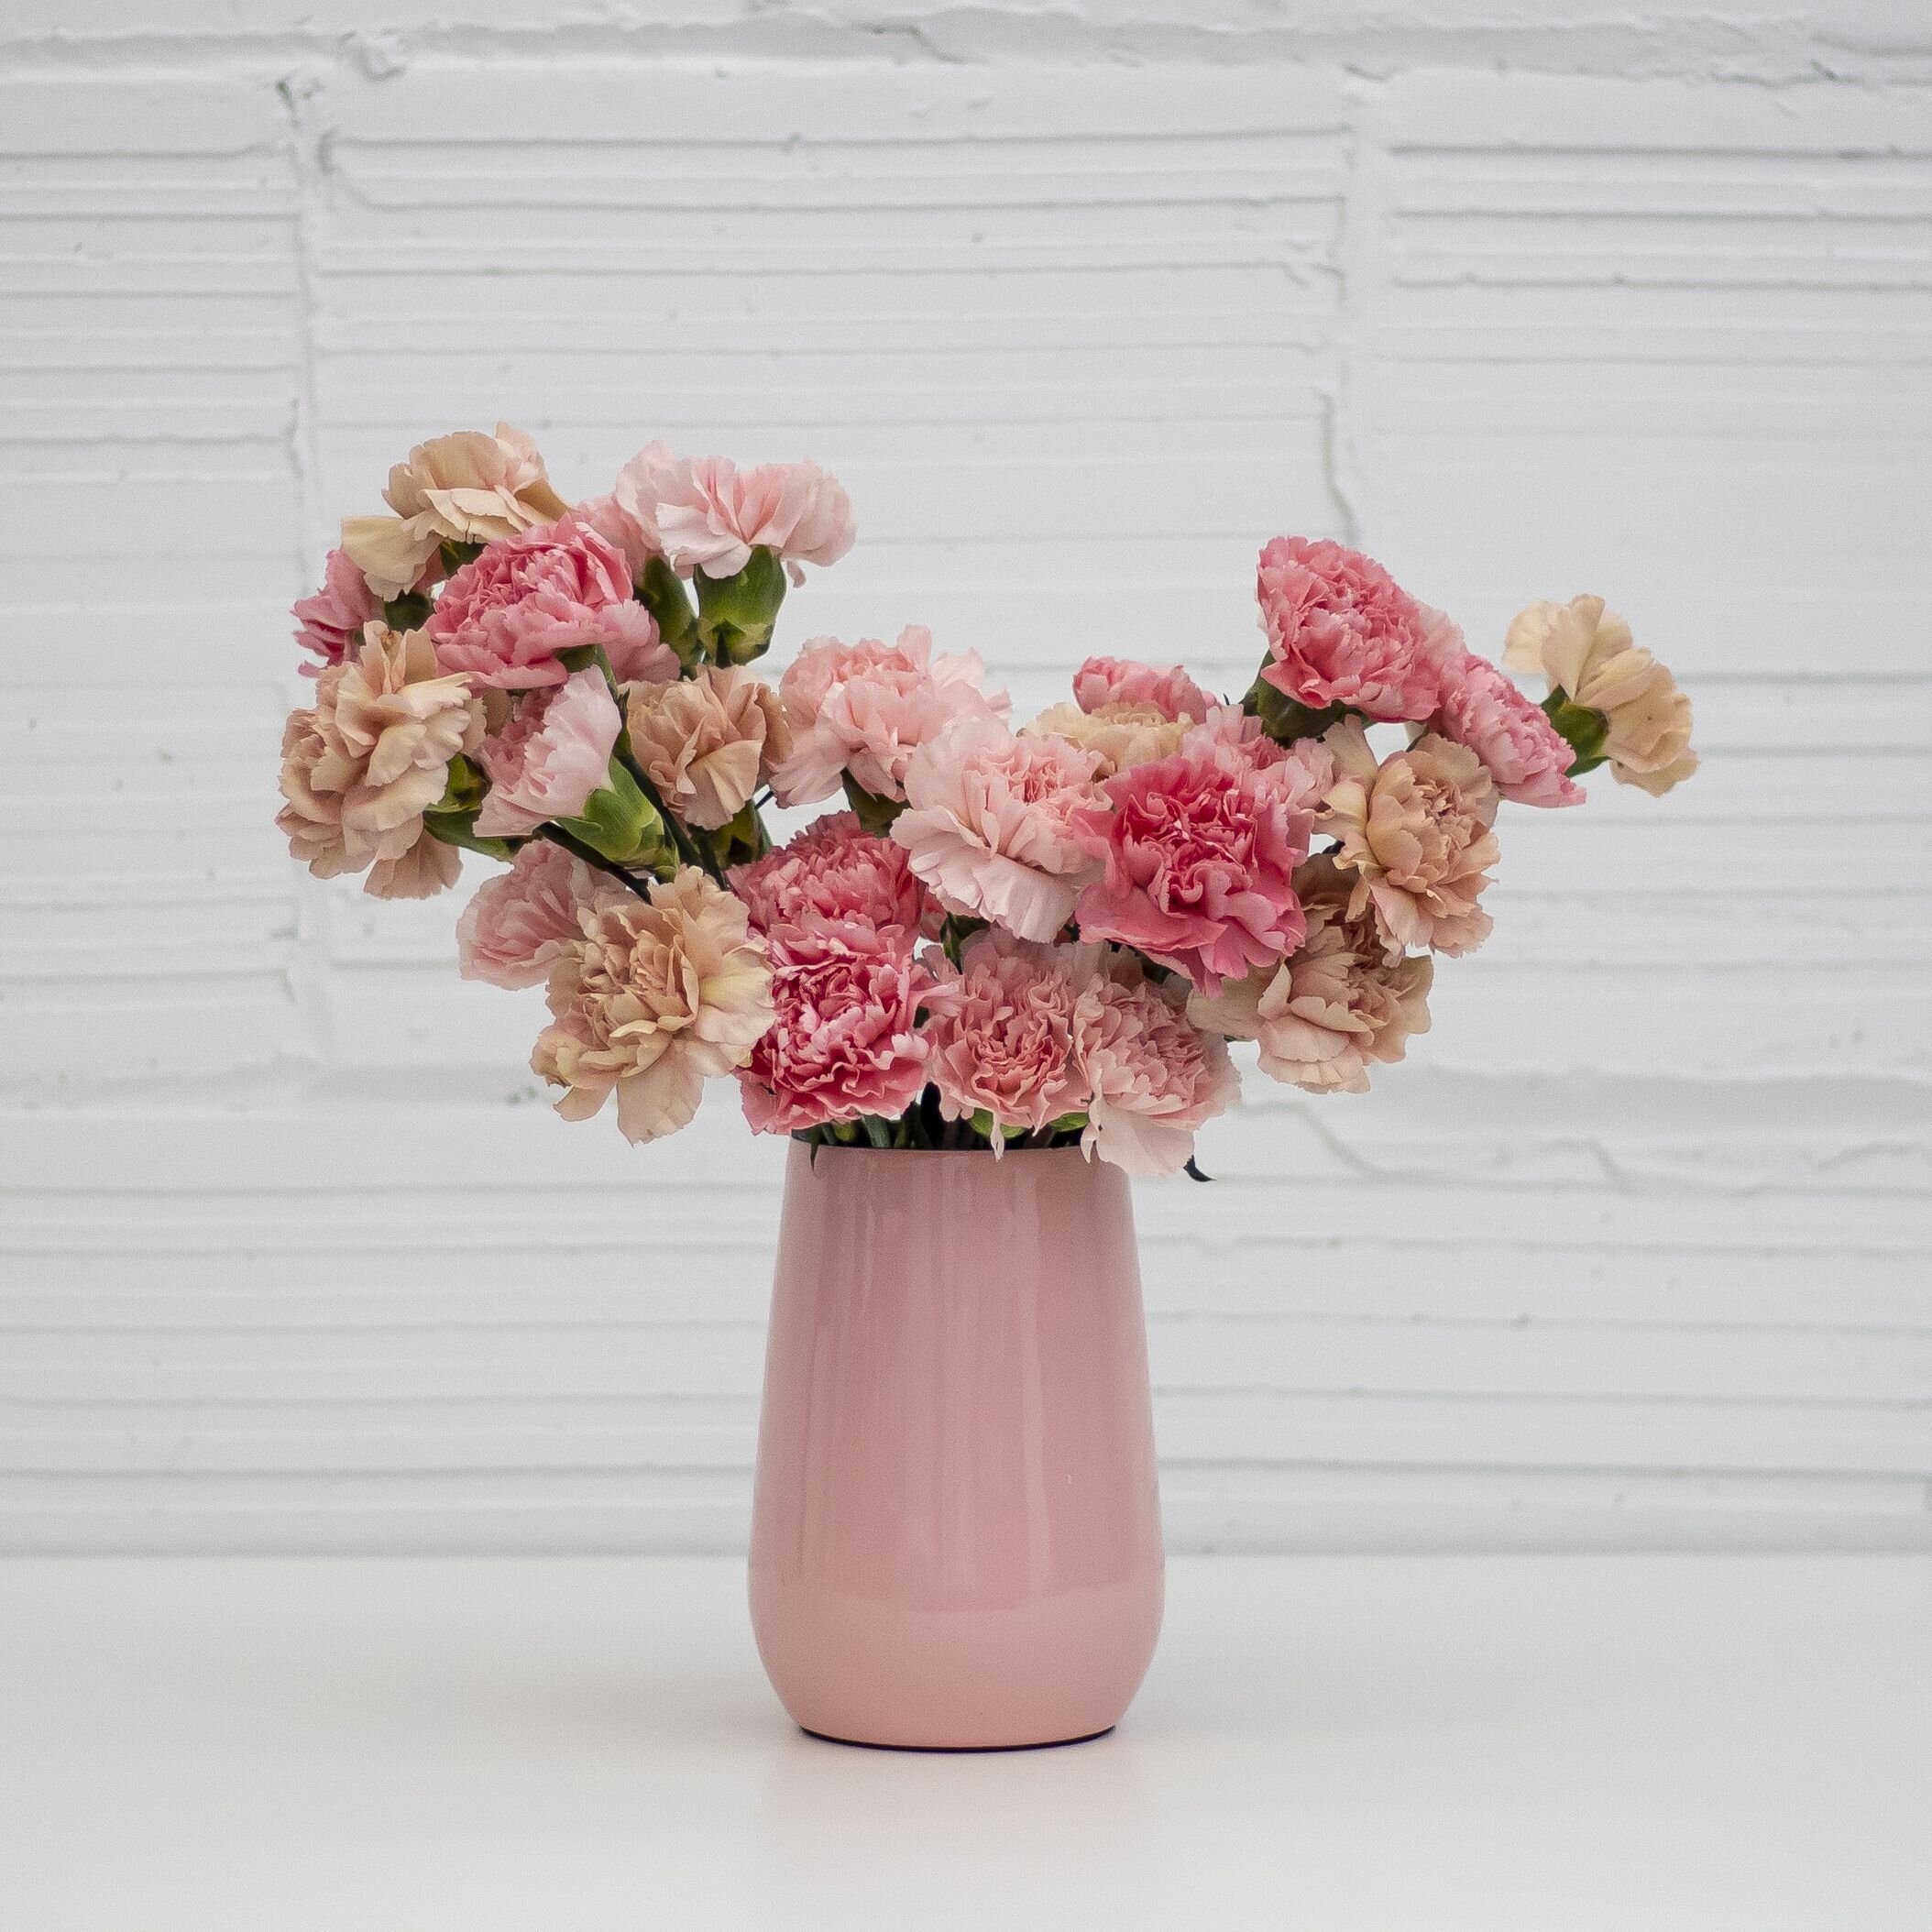 An arrangement of light pink and medium pink carnations in a pink vase on a white table